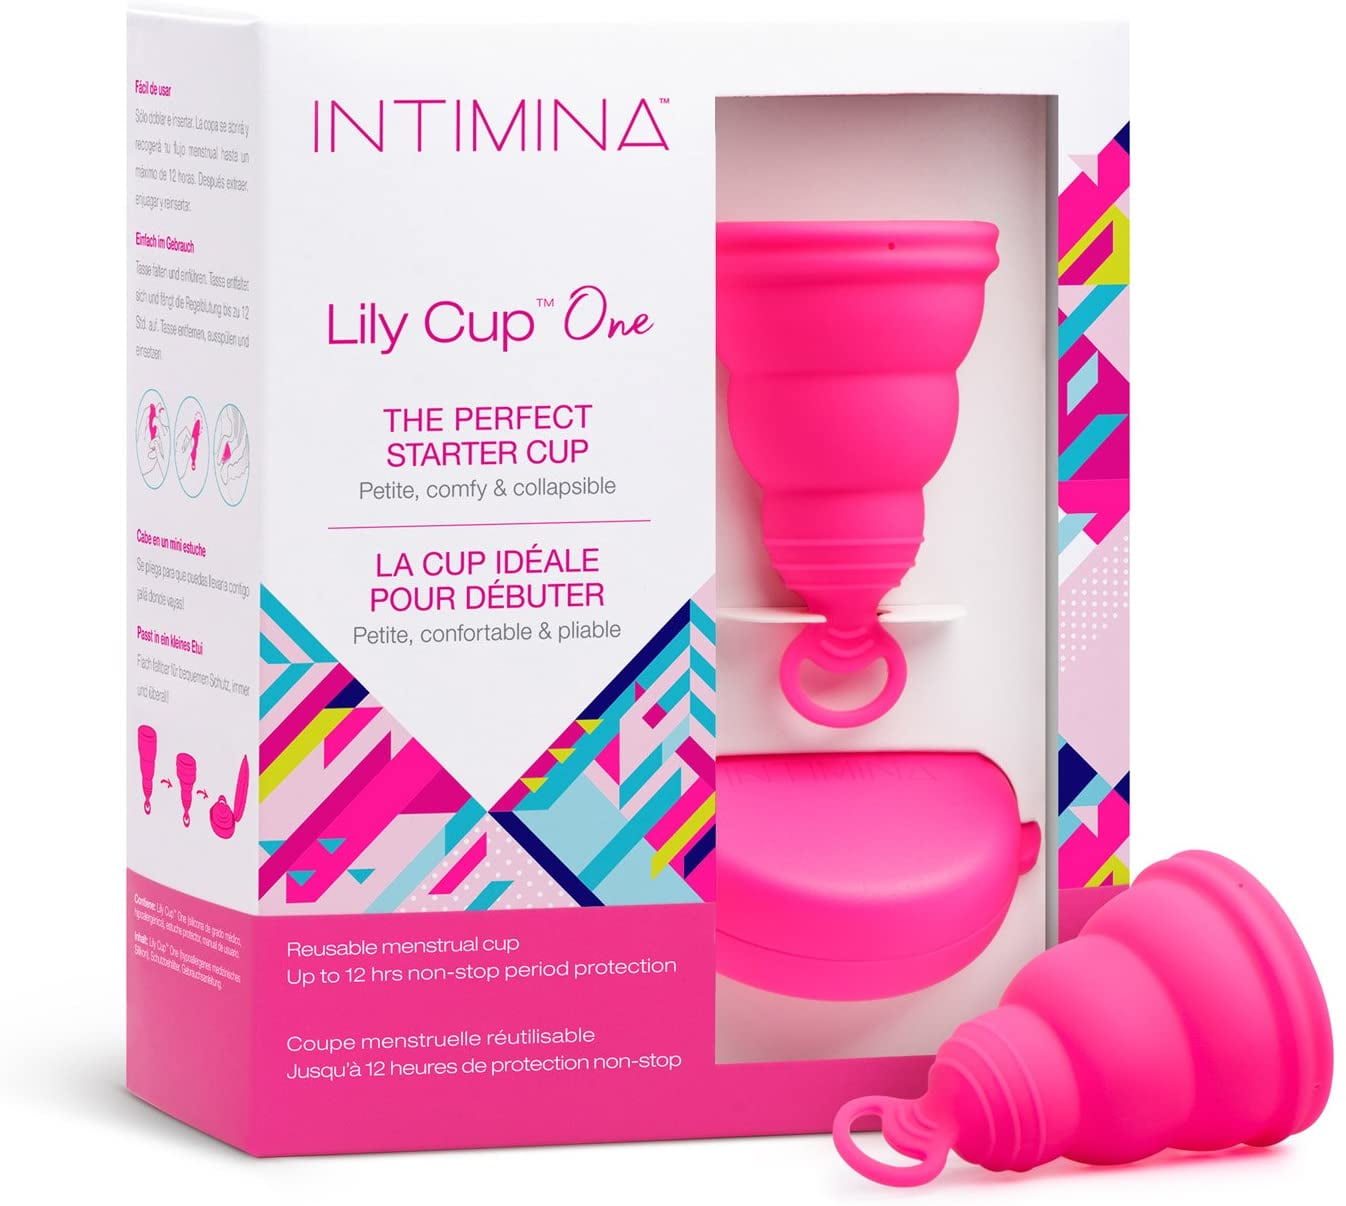 Intimina Lily Cup One – The Collapsible Teen Menstrual Cup for Beginners